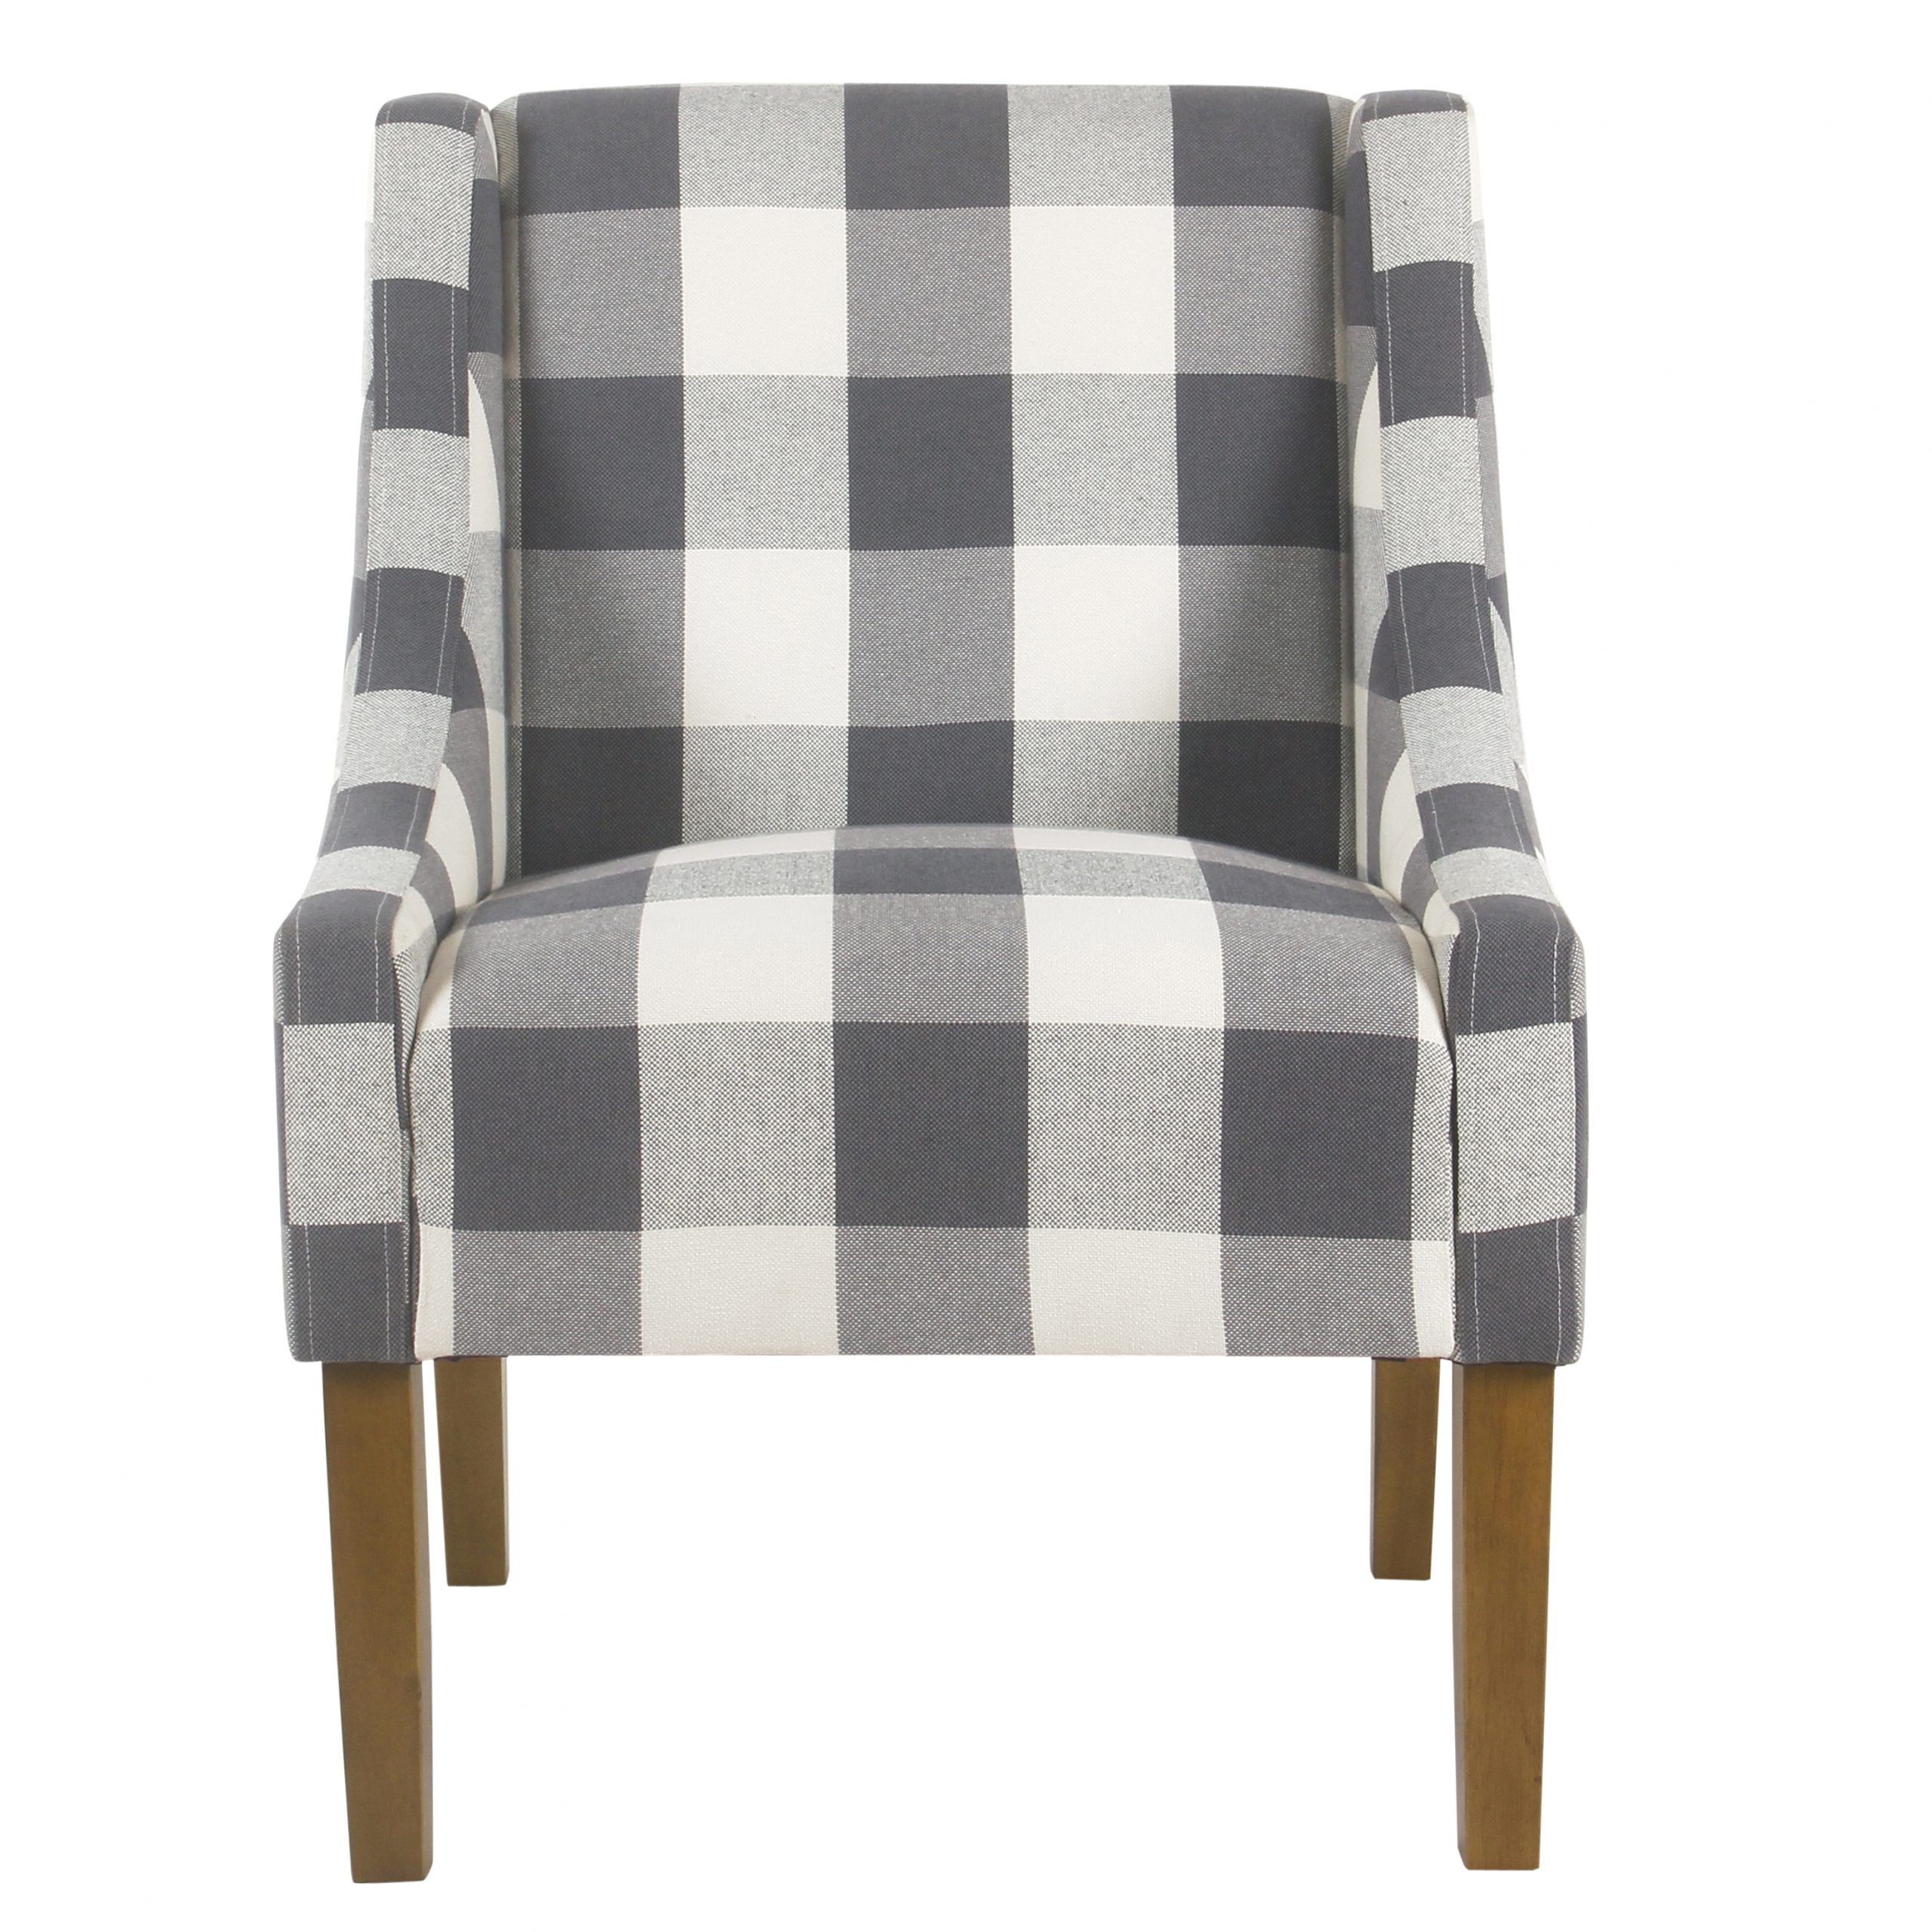 Homepop Modern Swoop Accent Chair, Gray Plaid – Walmart – Walmart Pertaining To Satin Gray Wood Accent Stools (View 20 of 20)